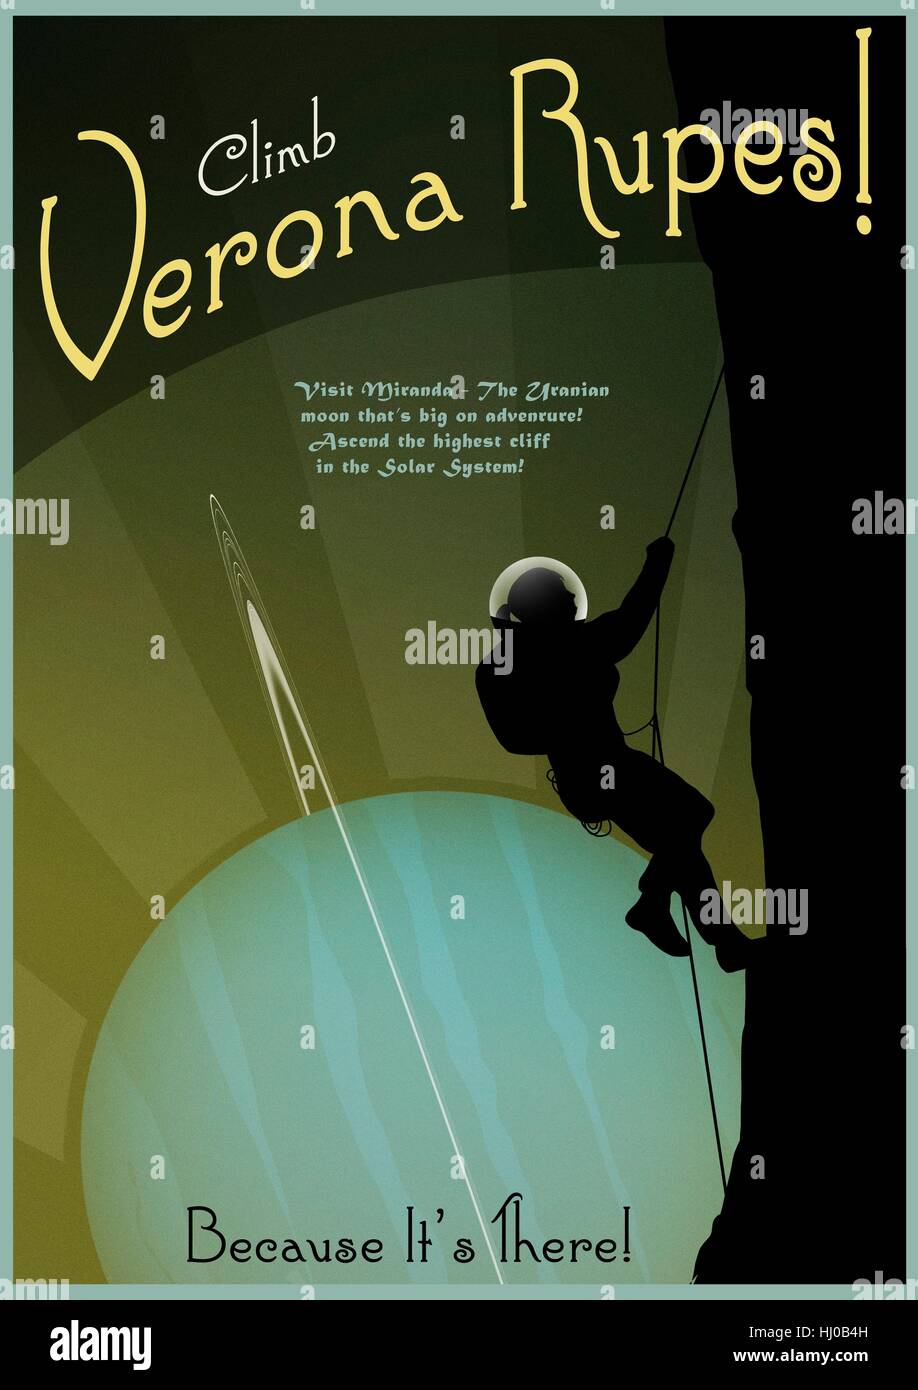 Miranda is the smallest of the five principal moons of Uranus. It is famous for its cliff, Verona Rupes, thought to be the tallest cliff in the known Solar System. Here, Miranda - and Verona Rupes in particular ? is advertised as a faux travel poster in art deco style. Stock Photo